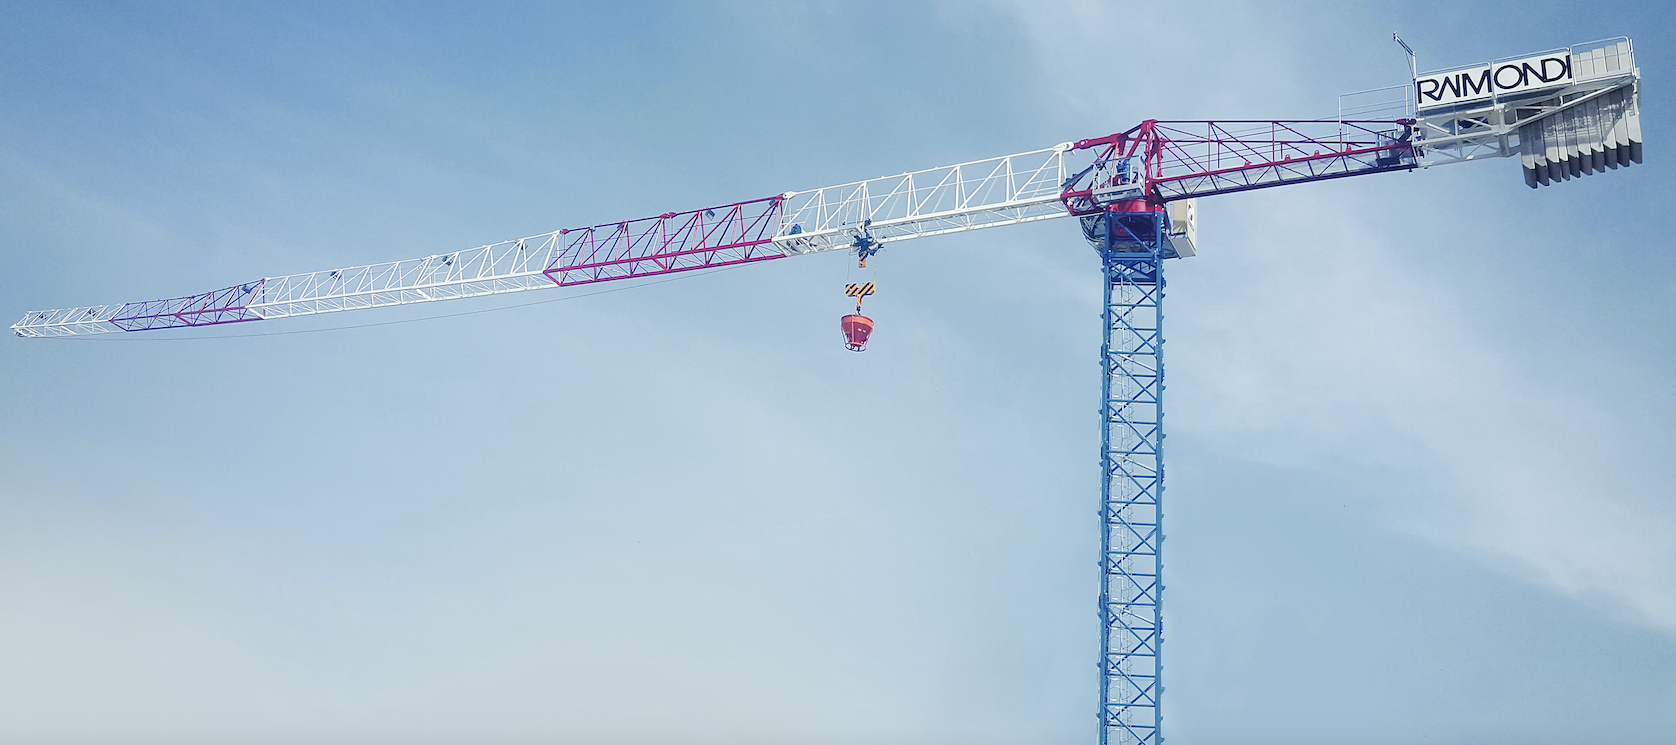  MRT159 topless crane with a 65 meter jib length and a maximum tip load of 1650 kg